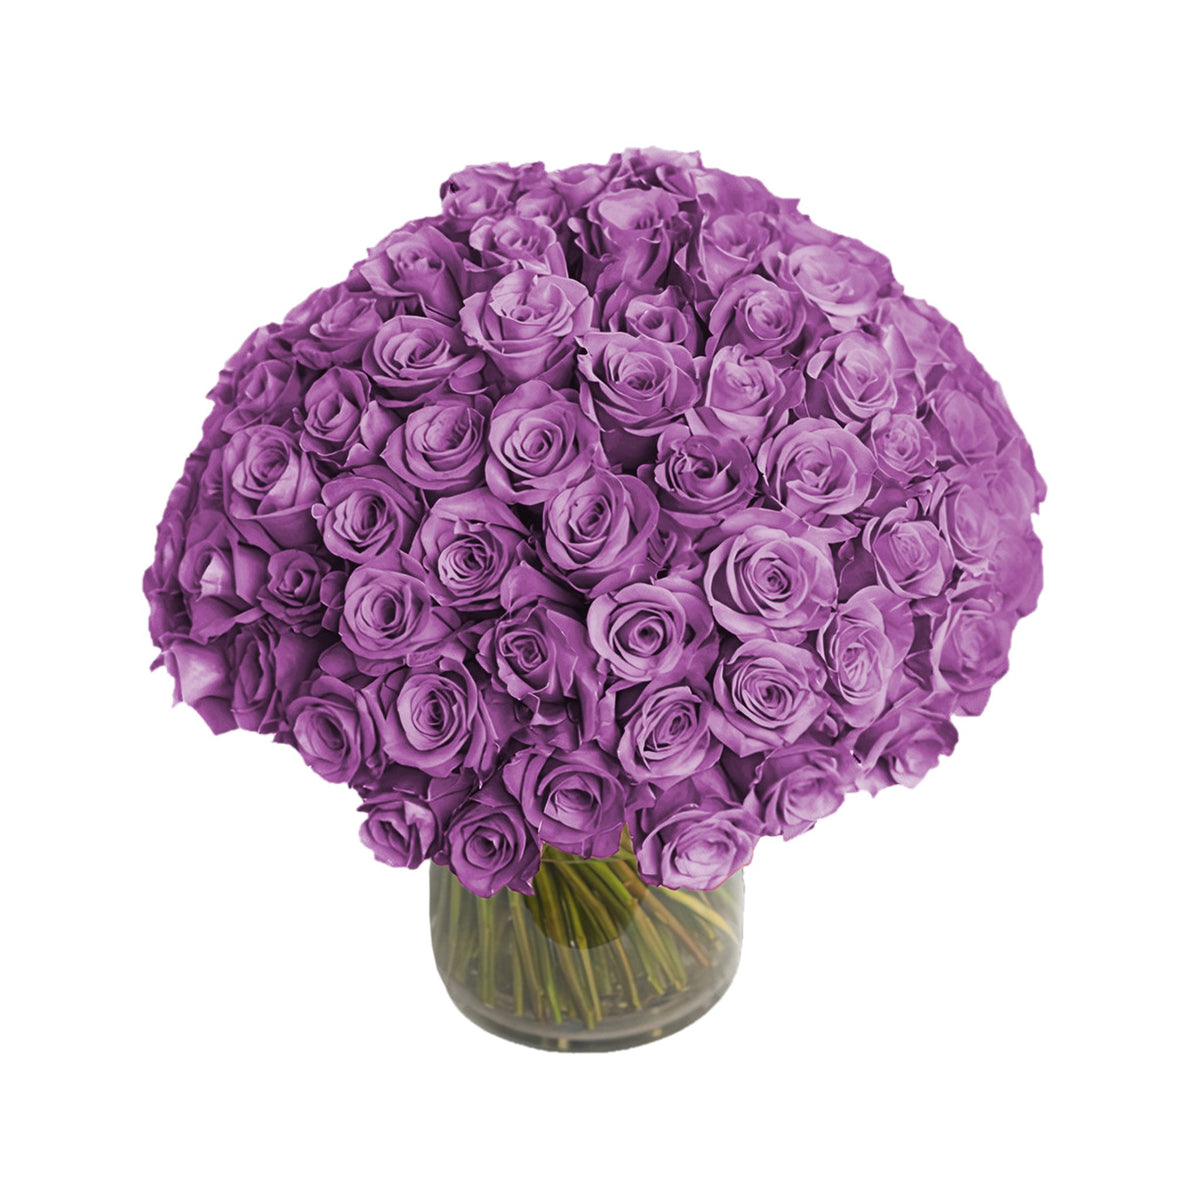 Queens Flower Delivery - Fresh Roses in a Crystal Vase | Purple - 100 Roses